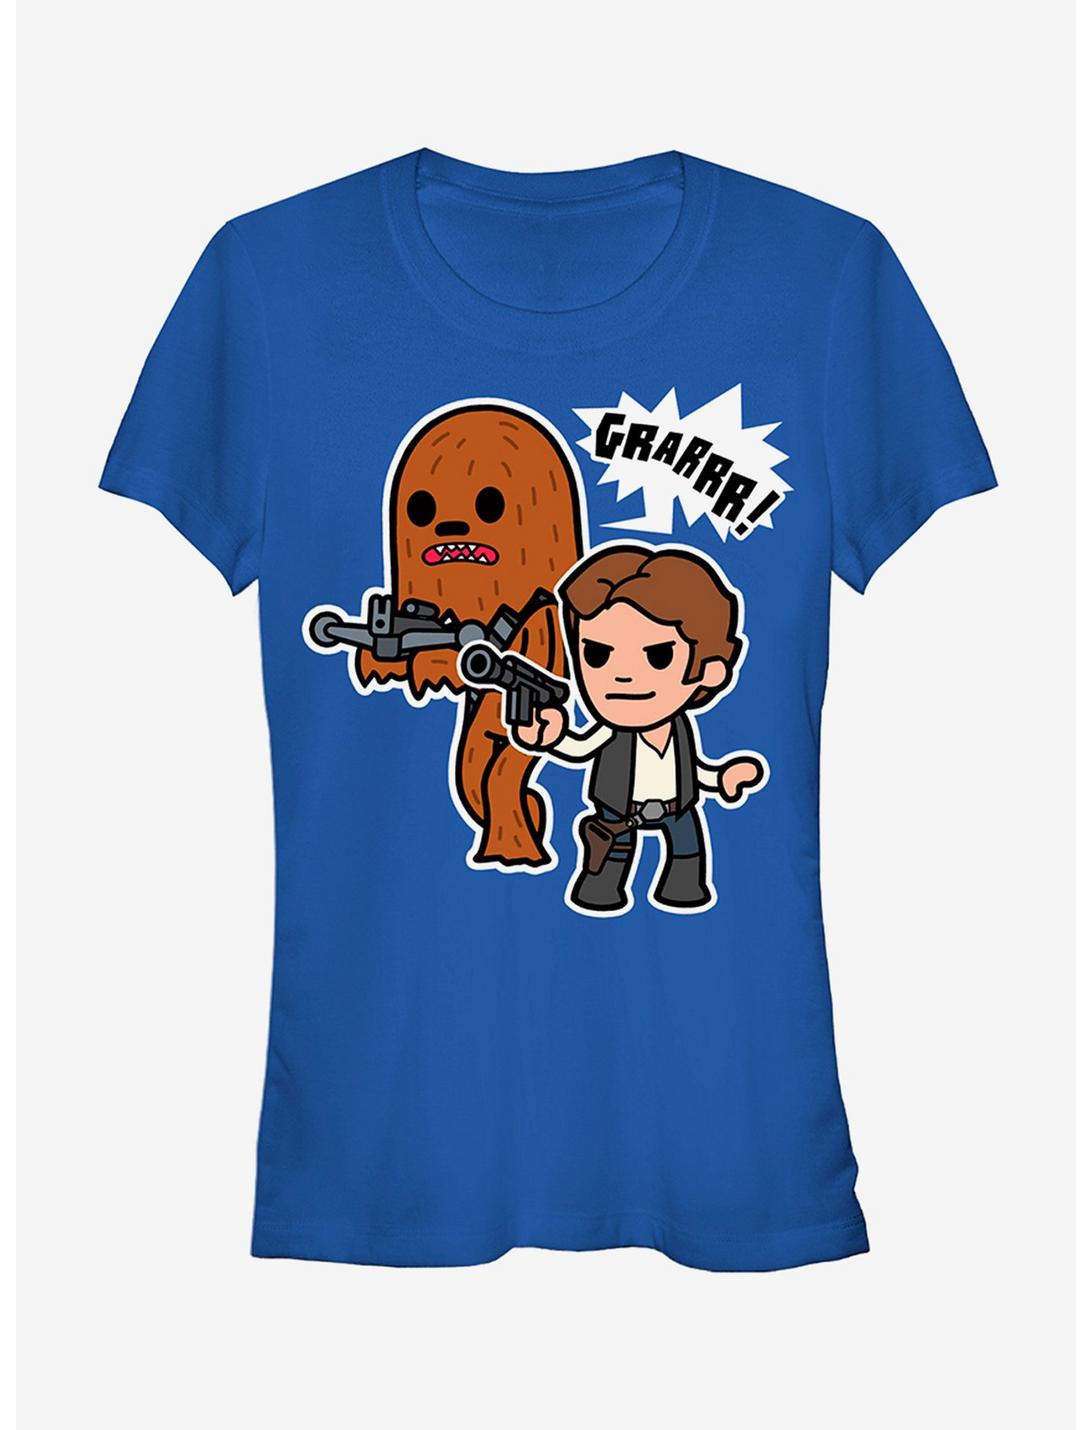 Star Wars Han Solo and Chewbacca Girls T-Shirt, , hi-res